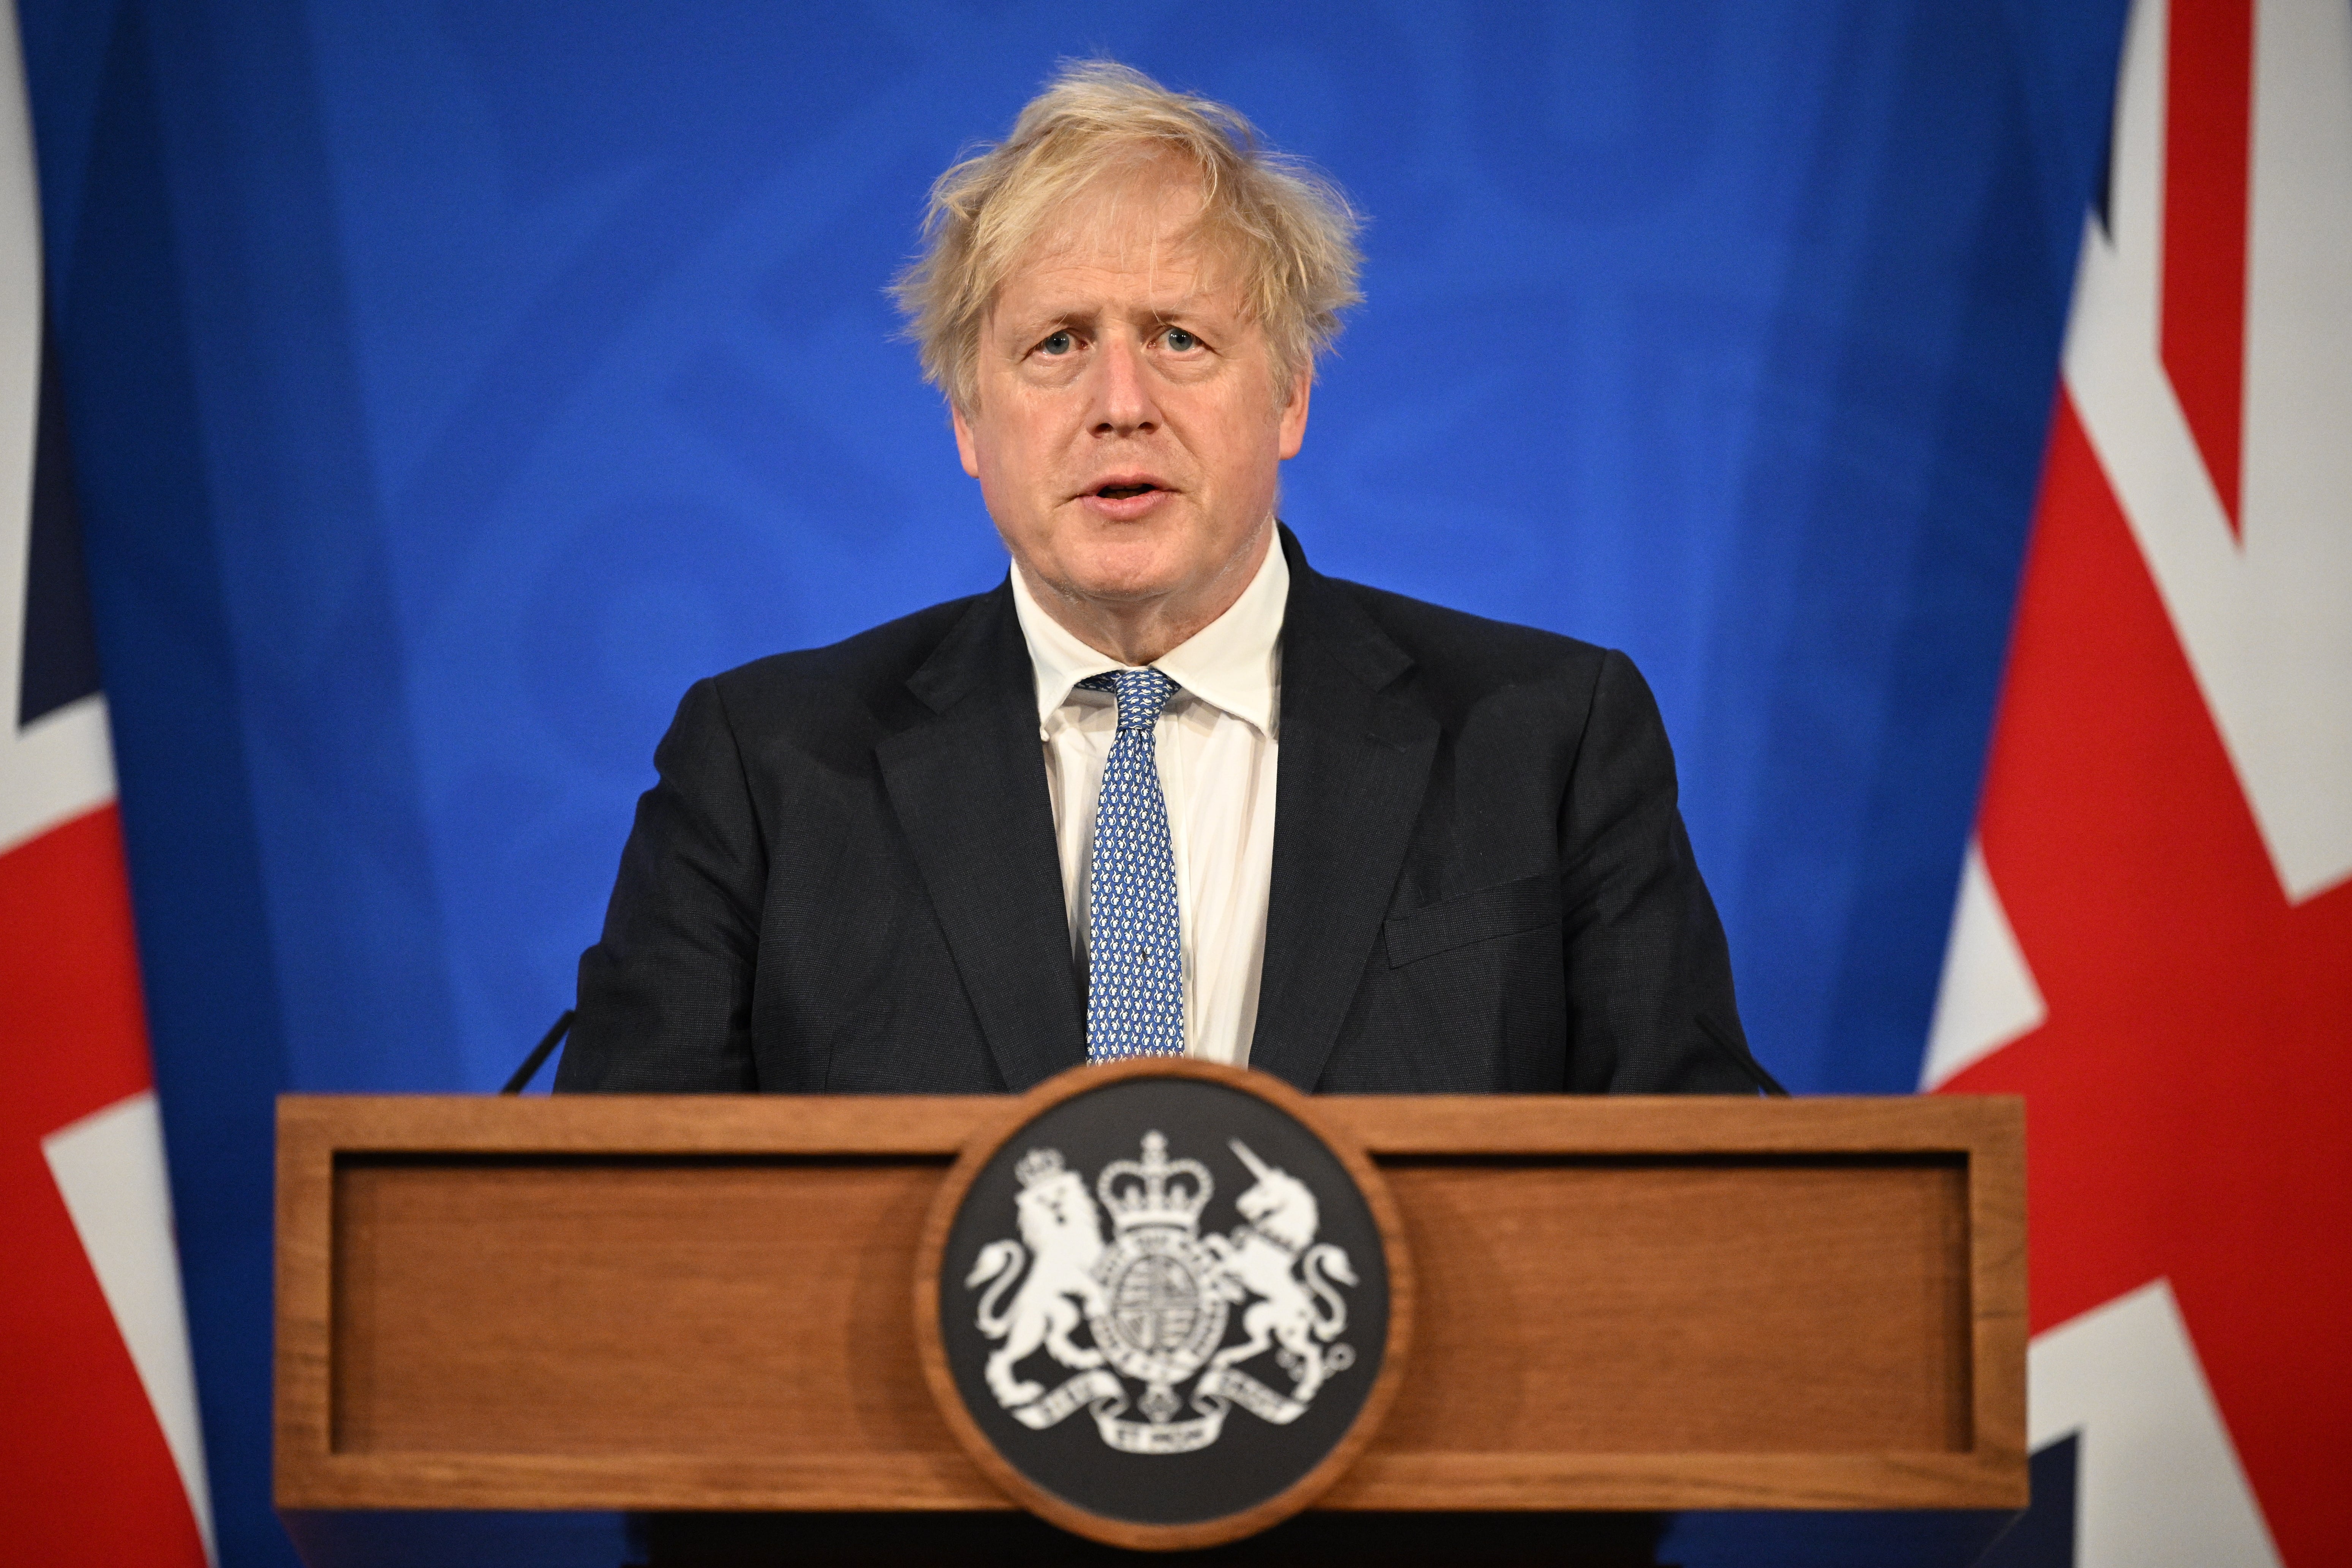 Prime Minister Boris Johnson speaks during a press conference in Downing Street (Leon Neal/PA)